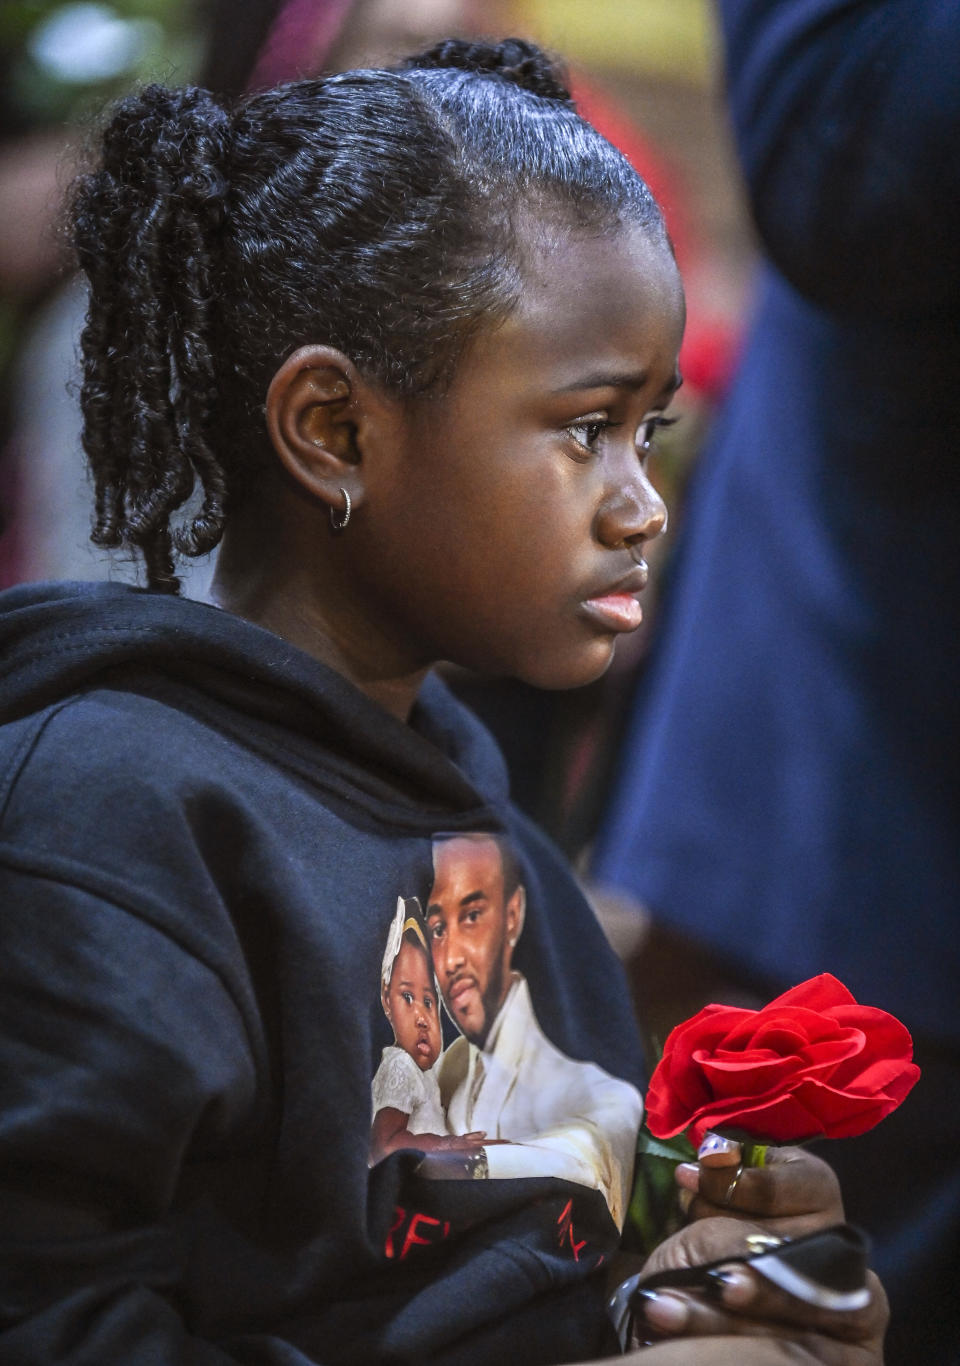 Avani Perkins holds a rose during a vigil for her father, Stephen Perkins, outside Decatur, Ala. City Hall/Police Department, Thursday, Oct. 5, 2023. Police shot and killed Perkins, 39, the week before in what began in an early morning confrontation with a tow truck driver trying to repossess a vehicle, police said. Perkins' family said that he was not behind on payments and the vehicle should not have been repossessed. (Jeronimo Nisa/The Decatur Daily via AP)